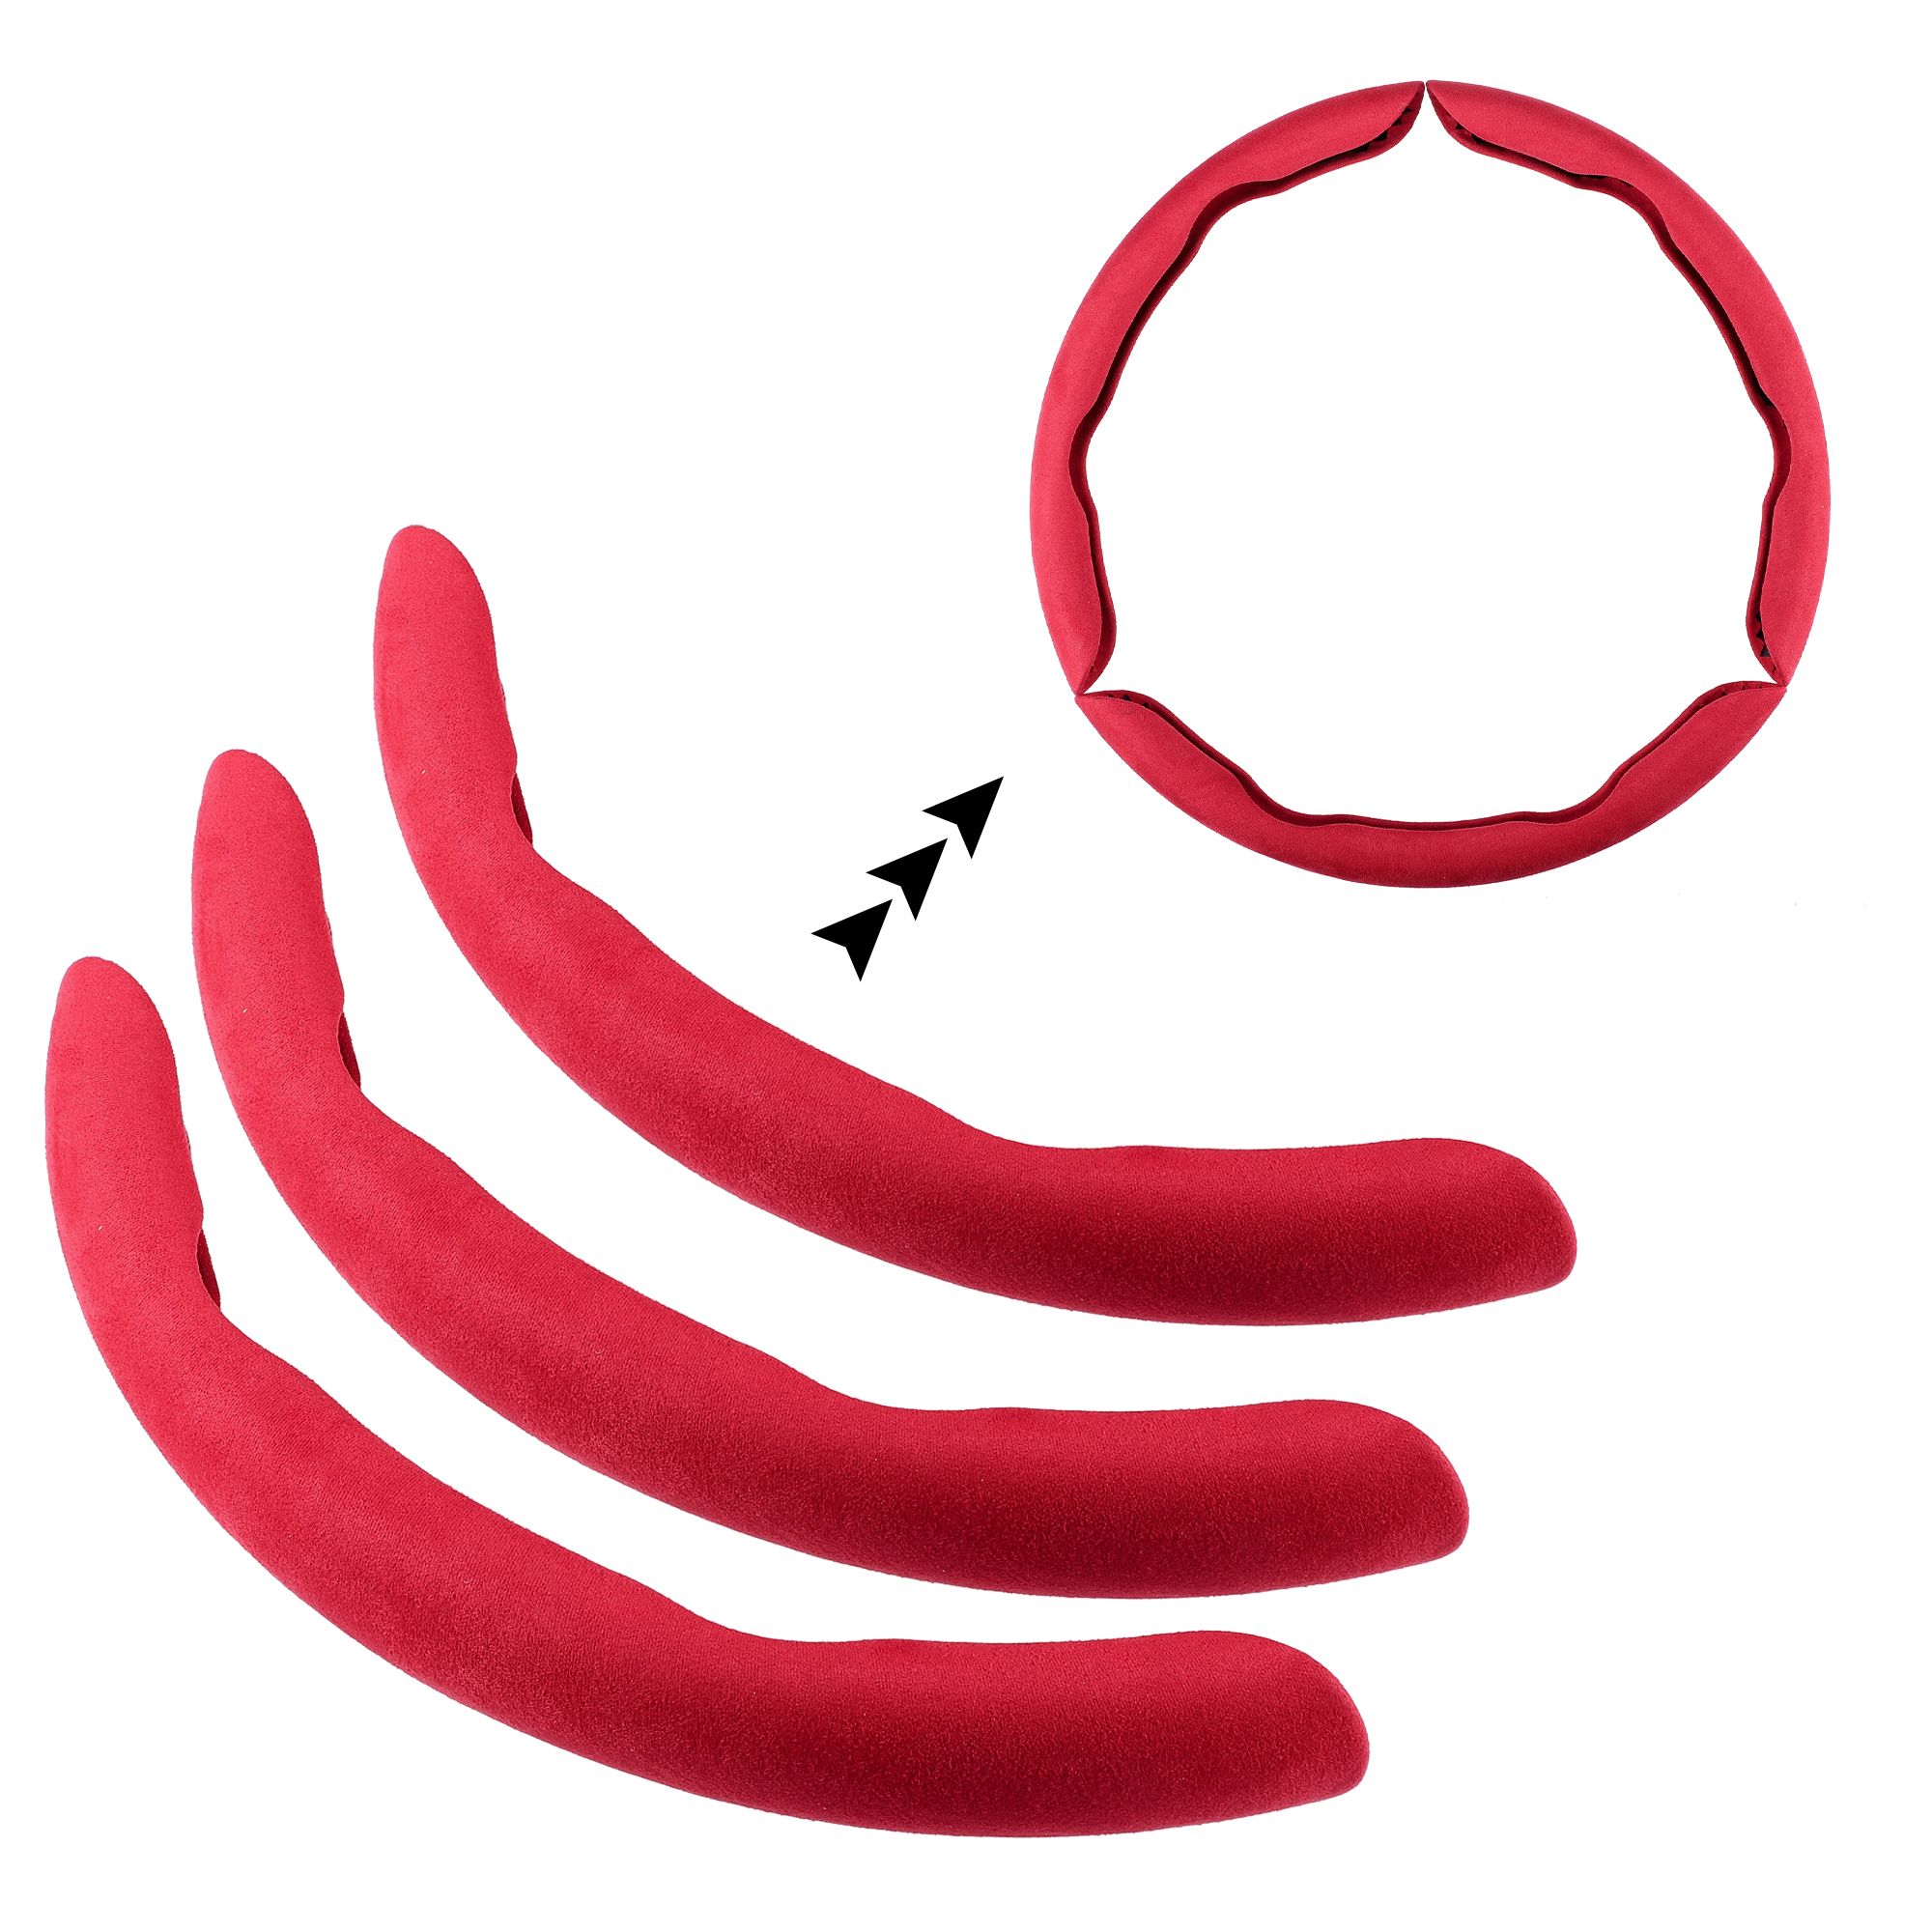 Unique Bargains 3pcs Segmented 14.5-15 Inch Universal for Car Steering Wheel Cover Suede Red